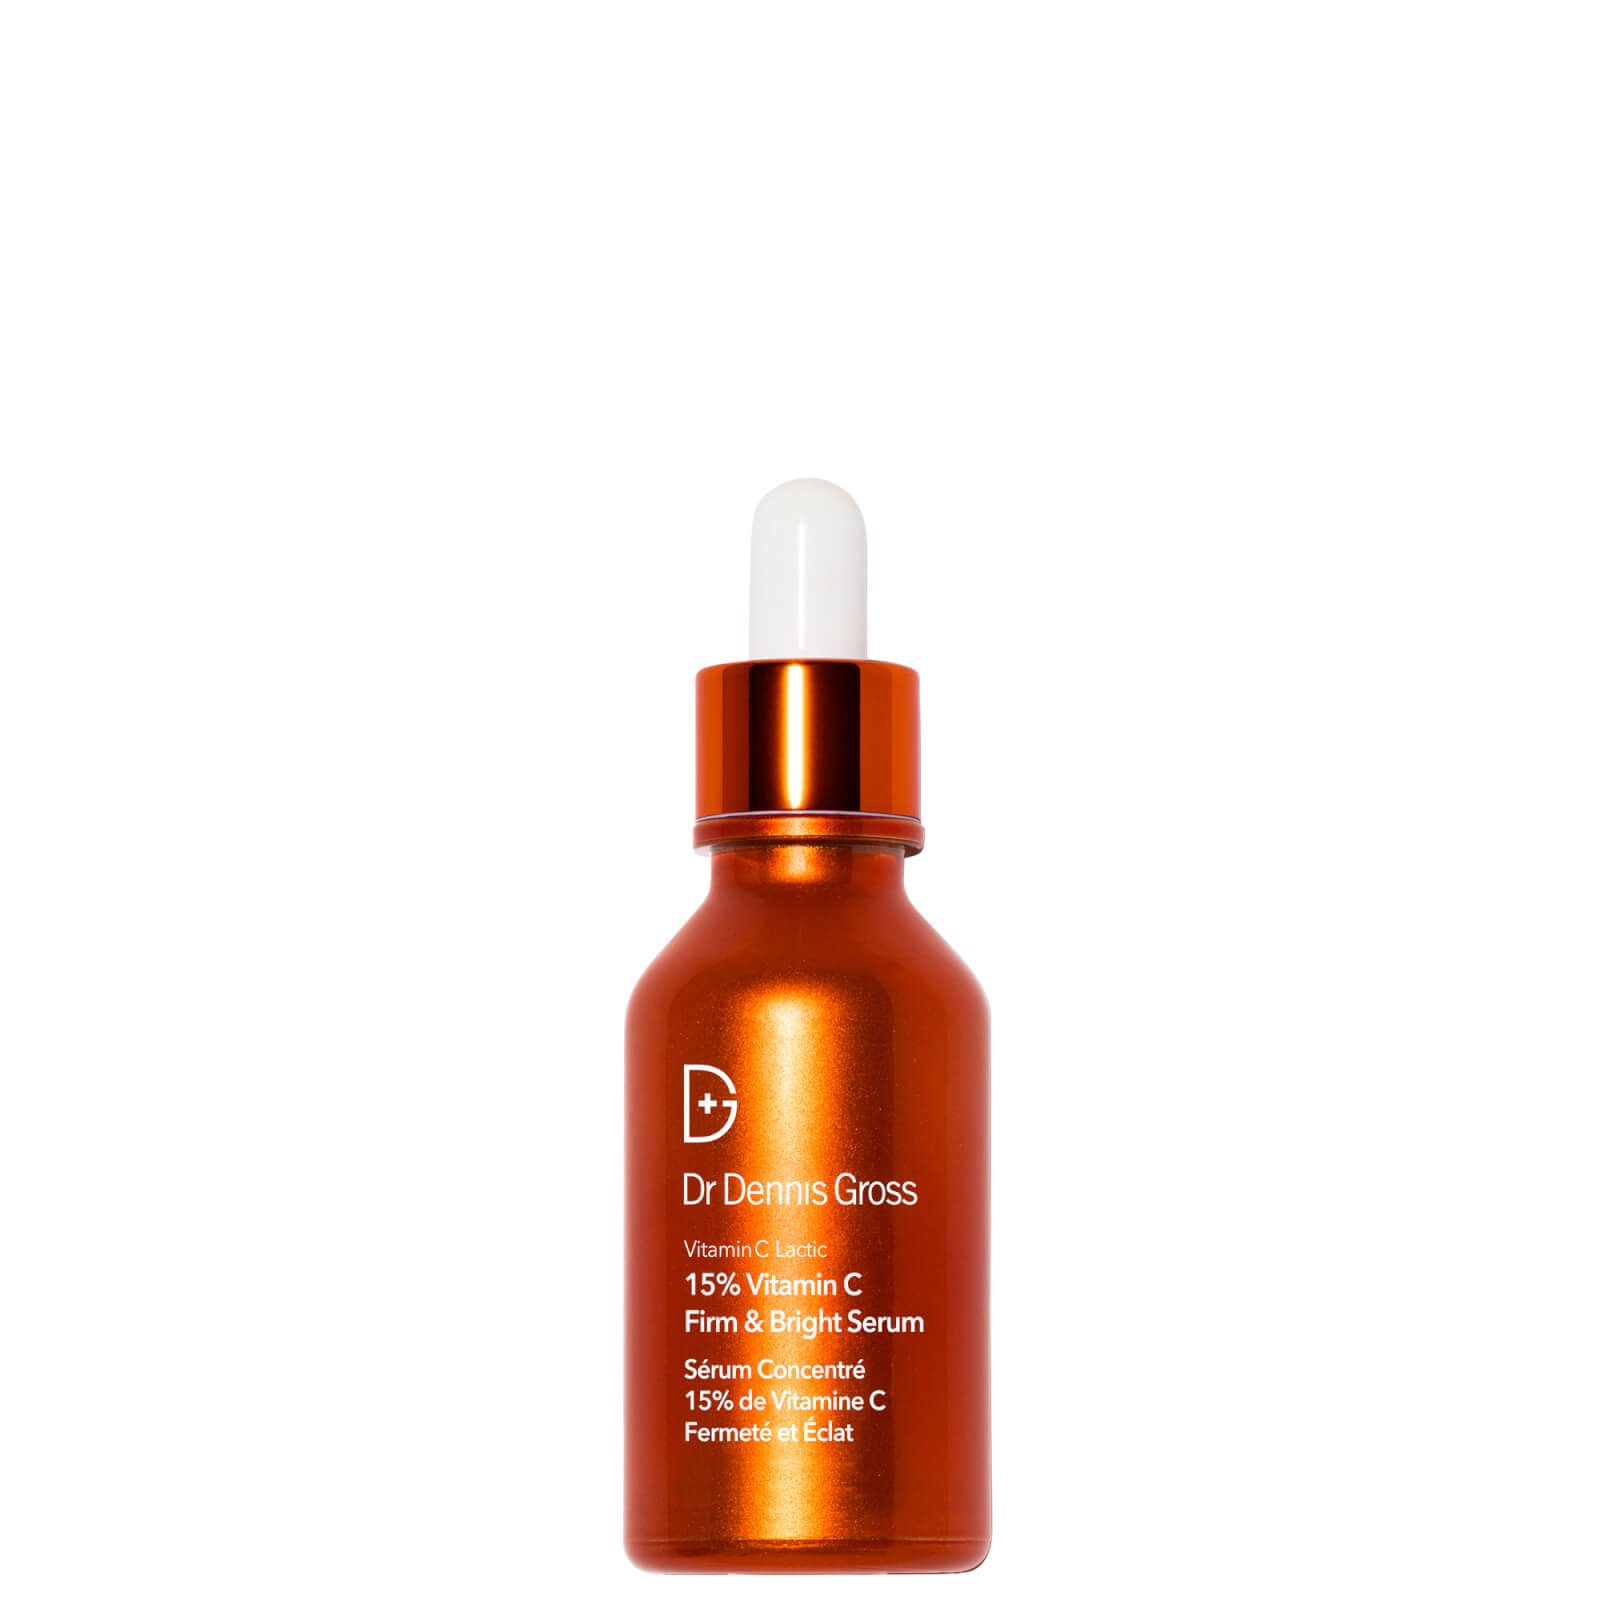 Image of Dr Dennis Gross Vitamin C and Lactic 15% Vitamin C Firm and Bright Serum 30ml